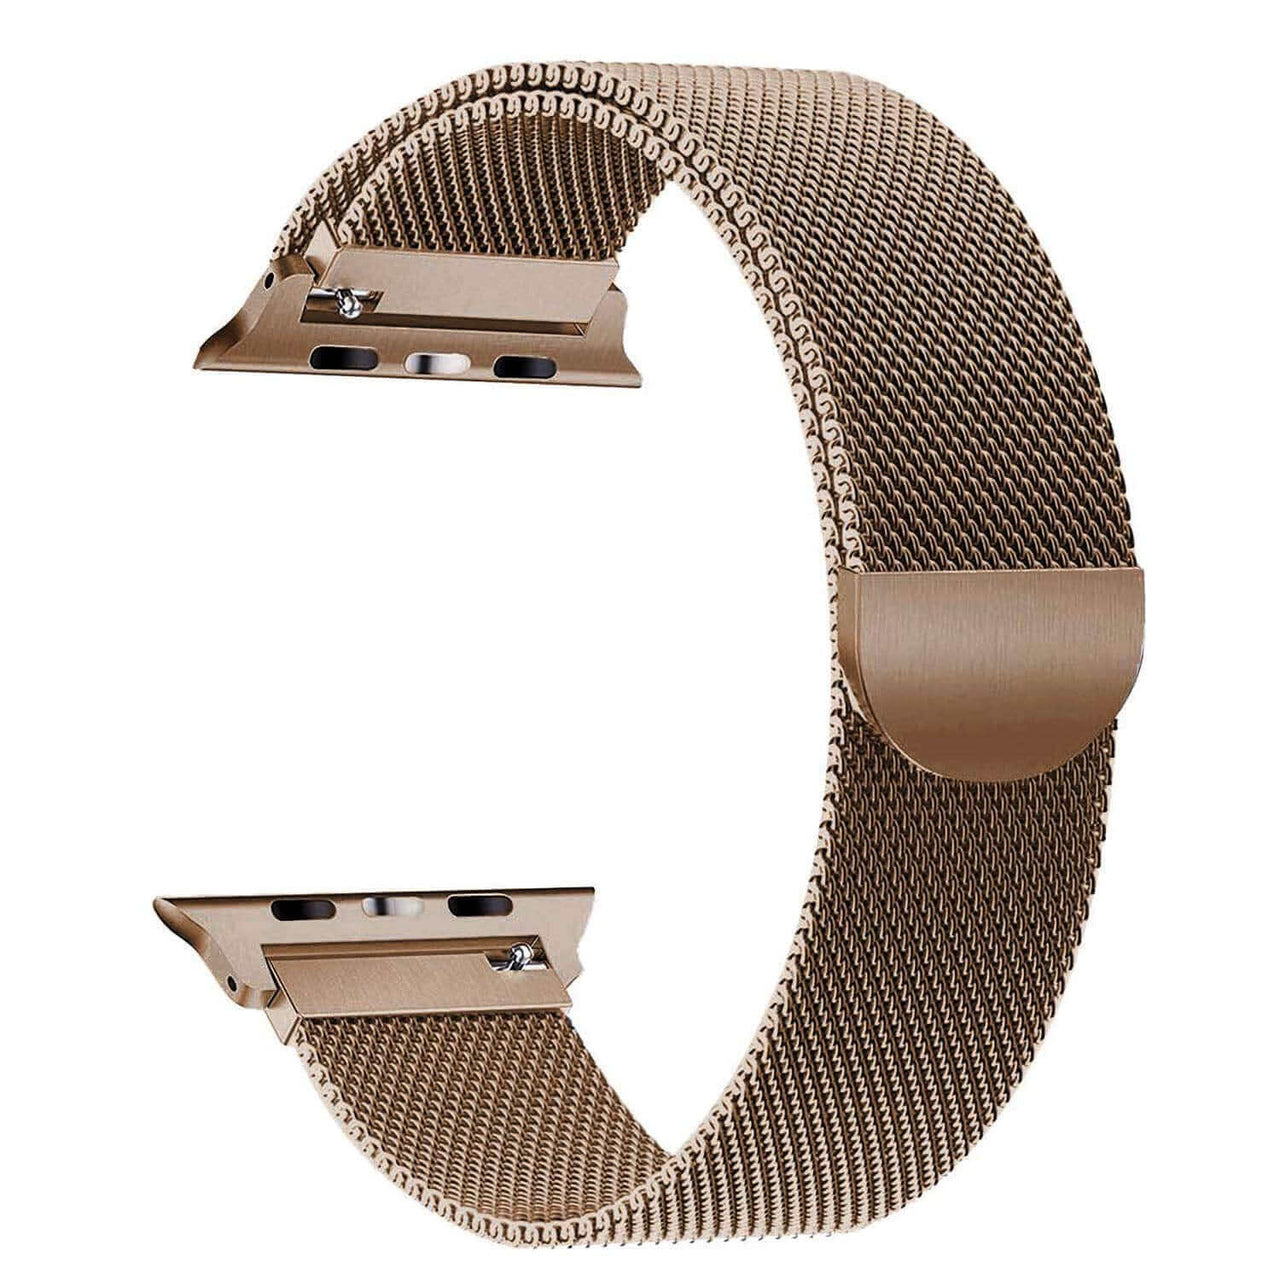 Milanese Metal Apple Strap in Smooth Chocolate Finish (Stainless Steel)